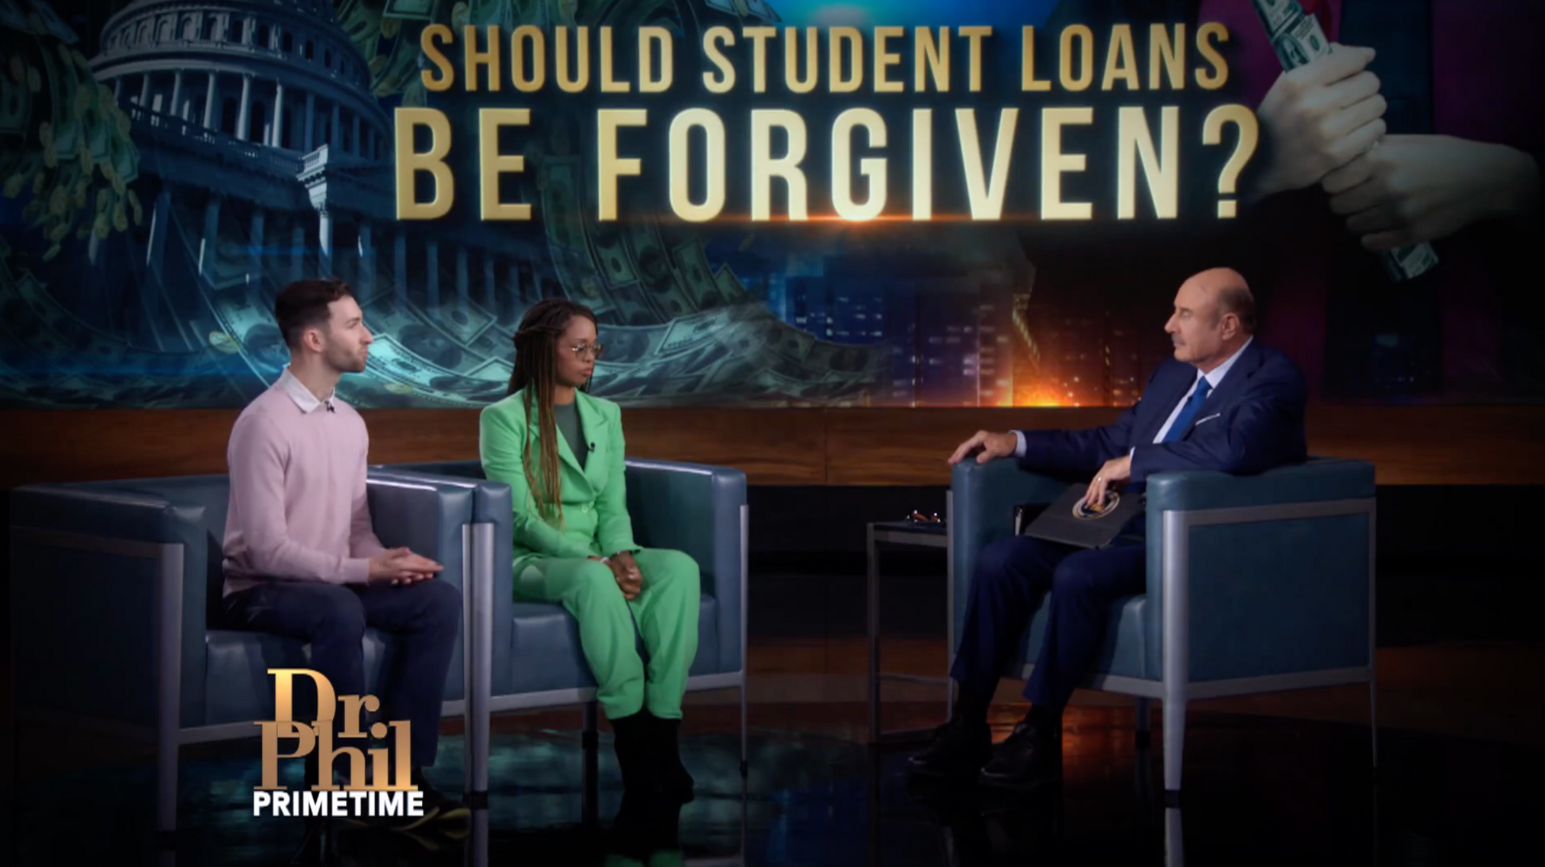 Should Student Loans be Forgiven?